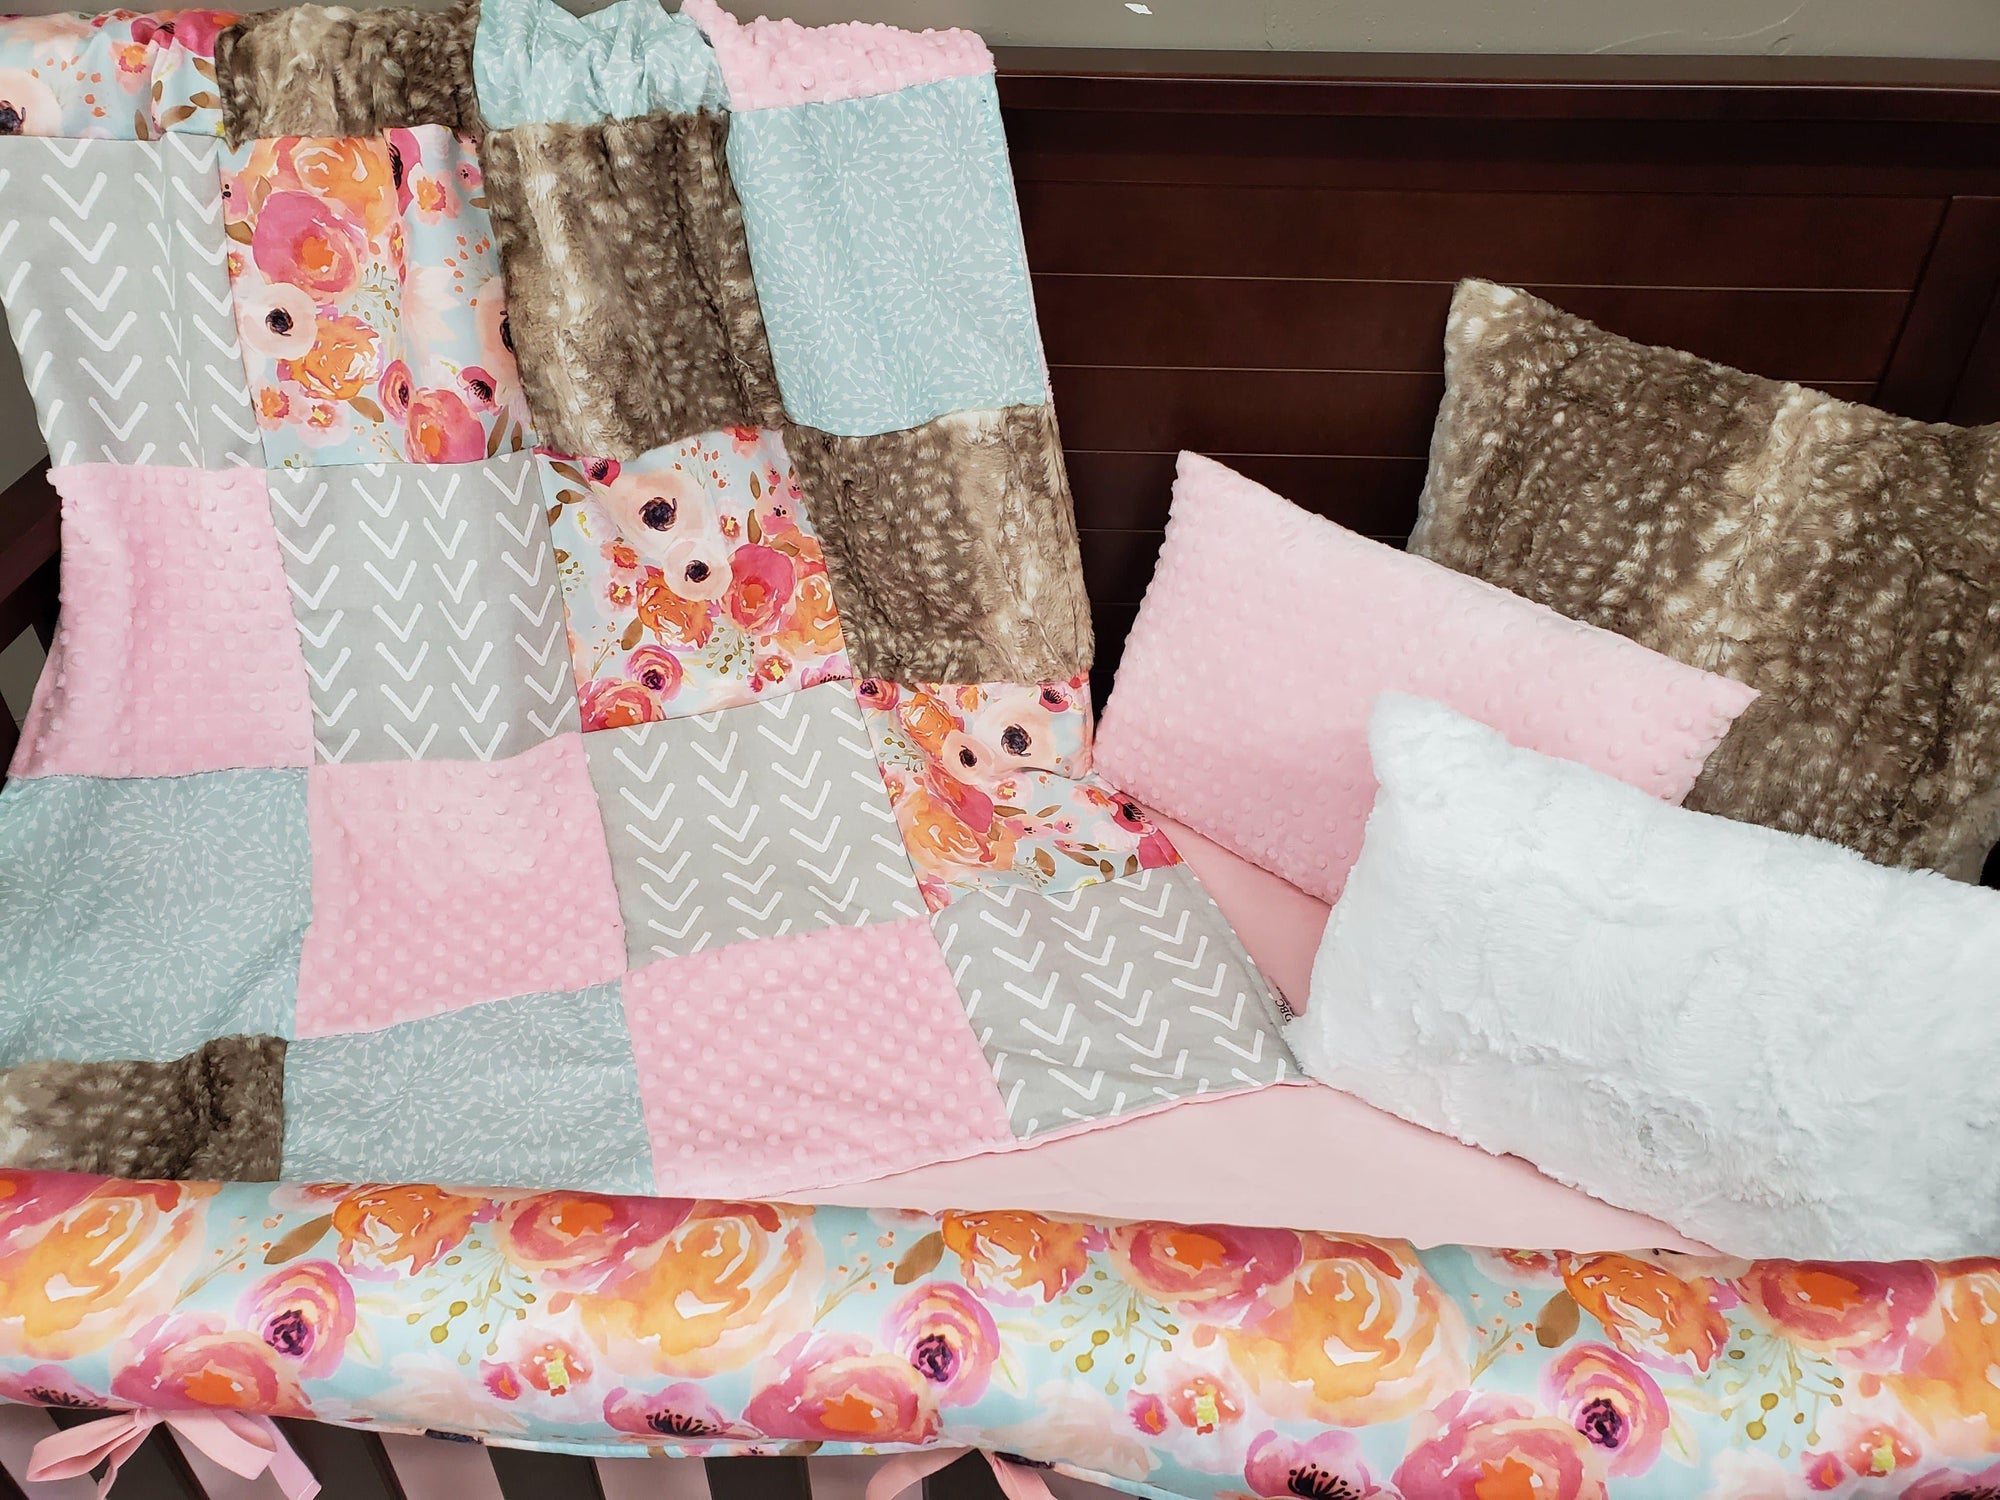 New Release Girl Crib Bedding - Watercolor Floral and Fawn Minky Baby & Toddler Bedding Collection - DBC Baby Bedding Co 